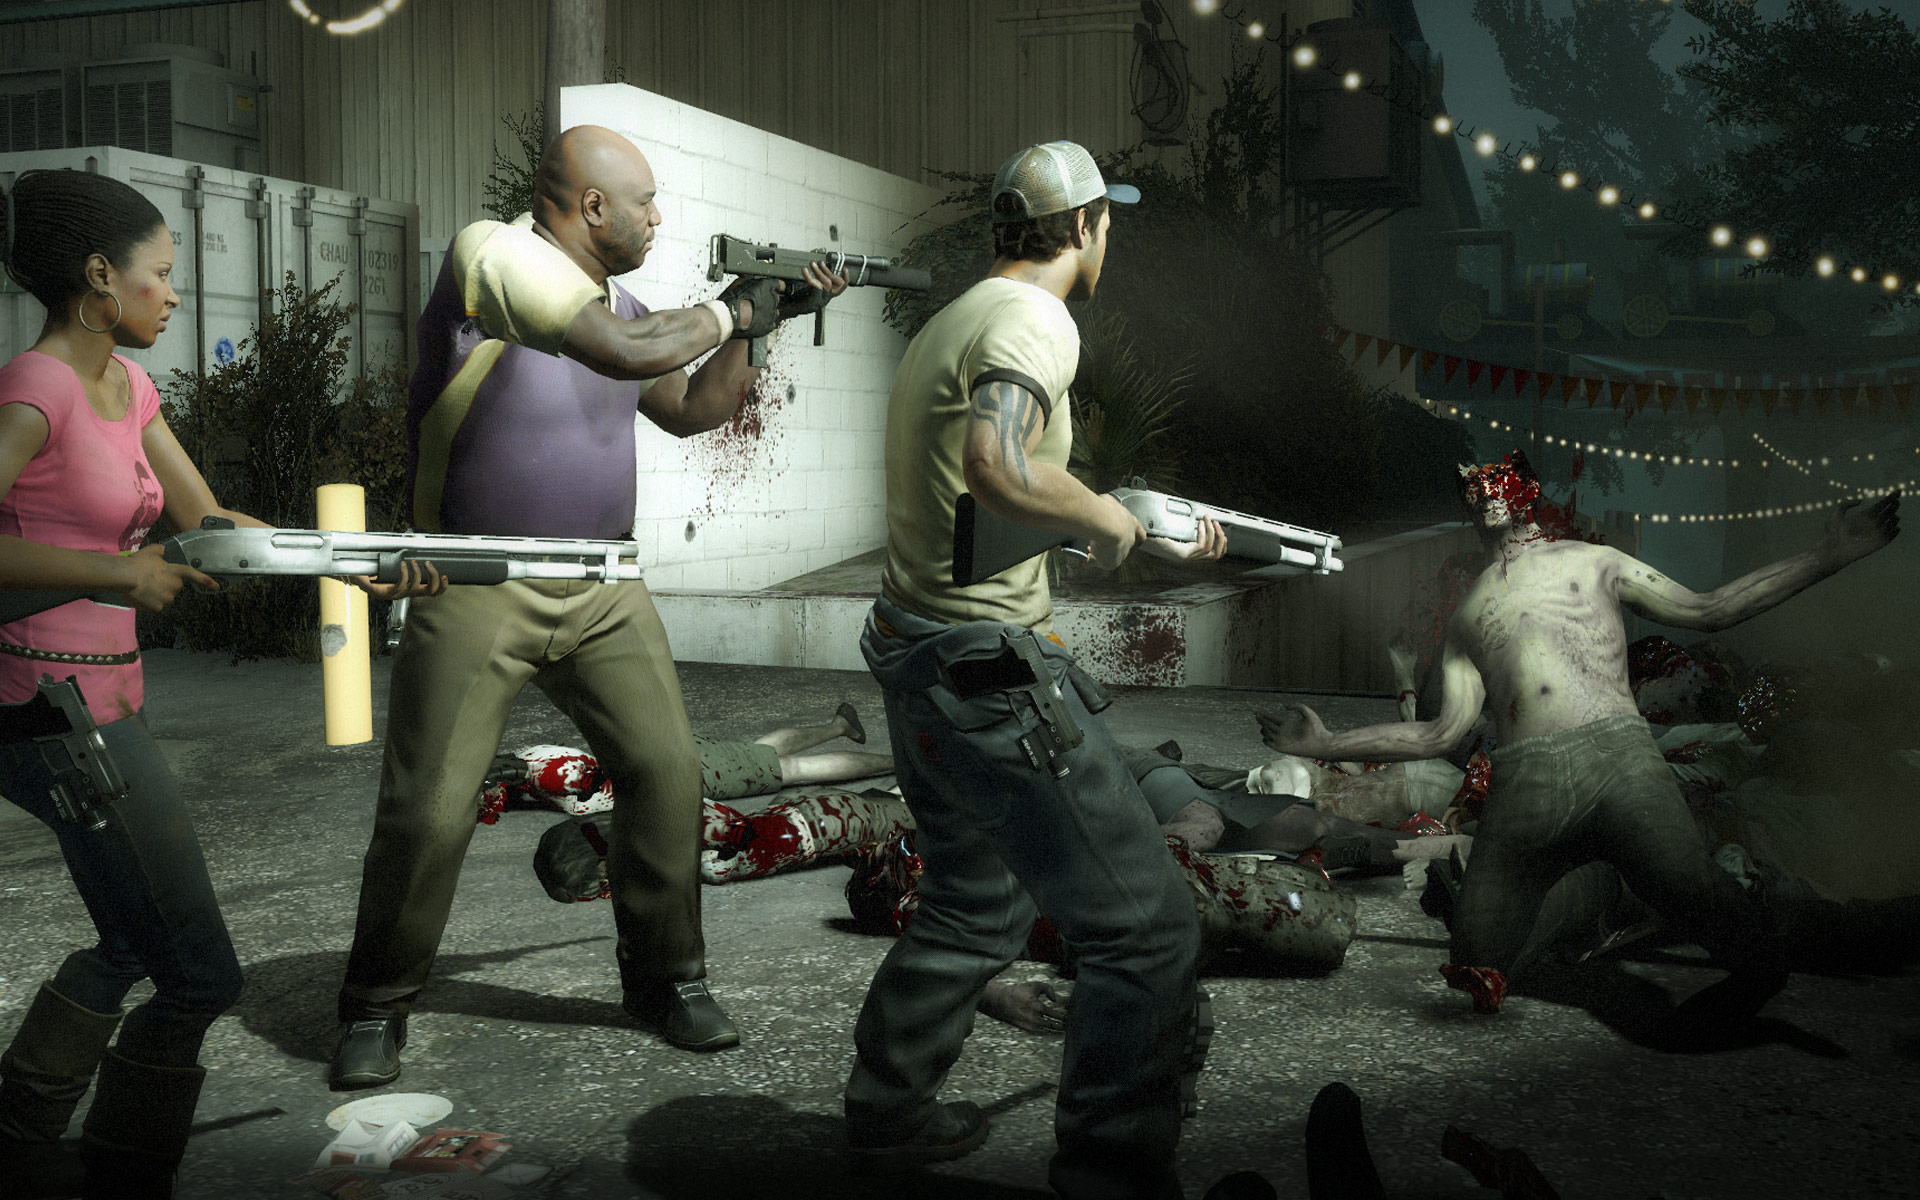 The whole gang is there in this Left 4 Dead screenshot, shooting zombies. Except the dude in the sport coat. No one likes him.